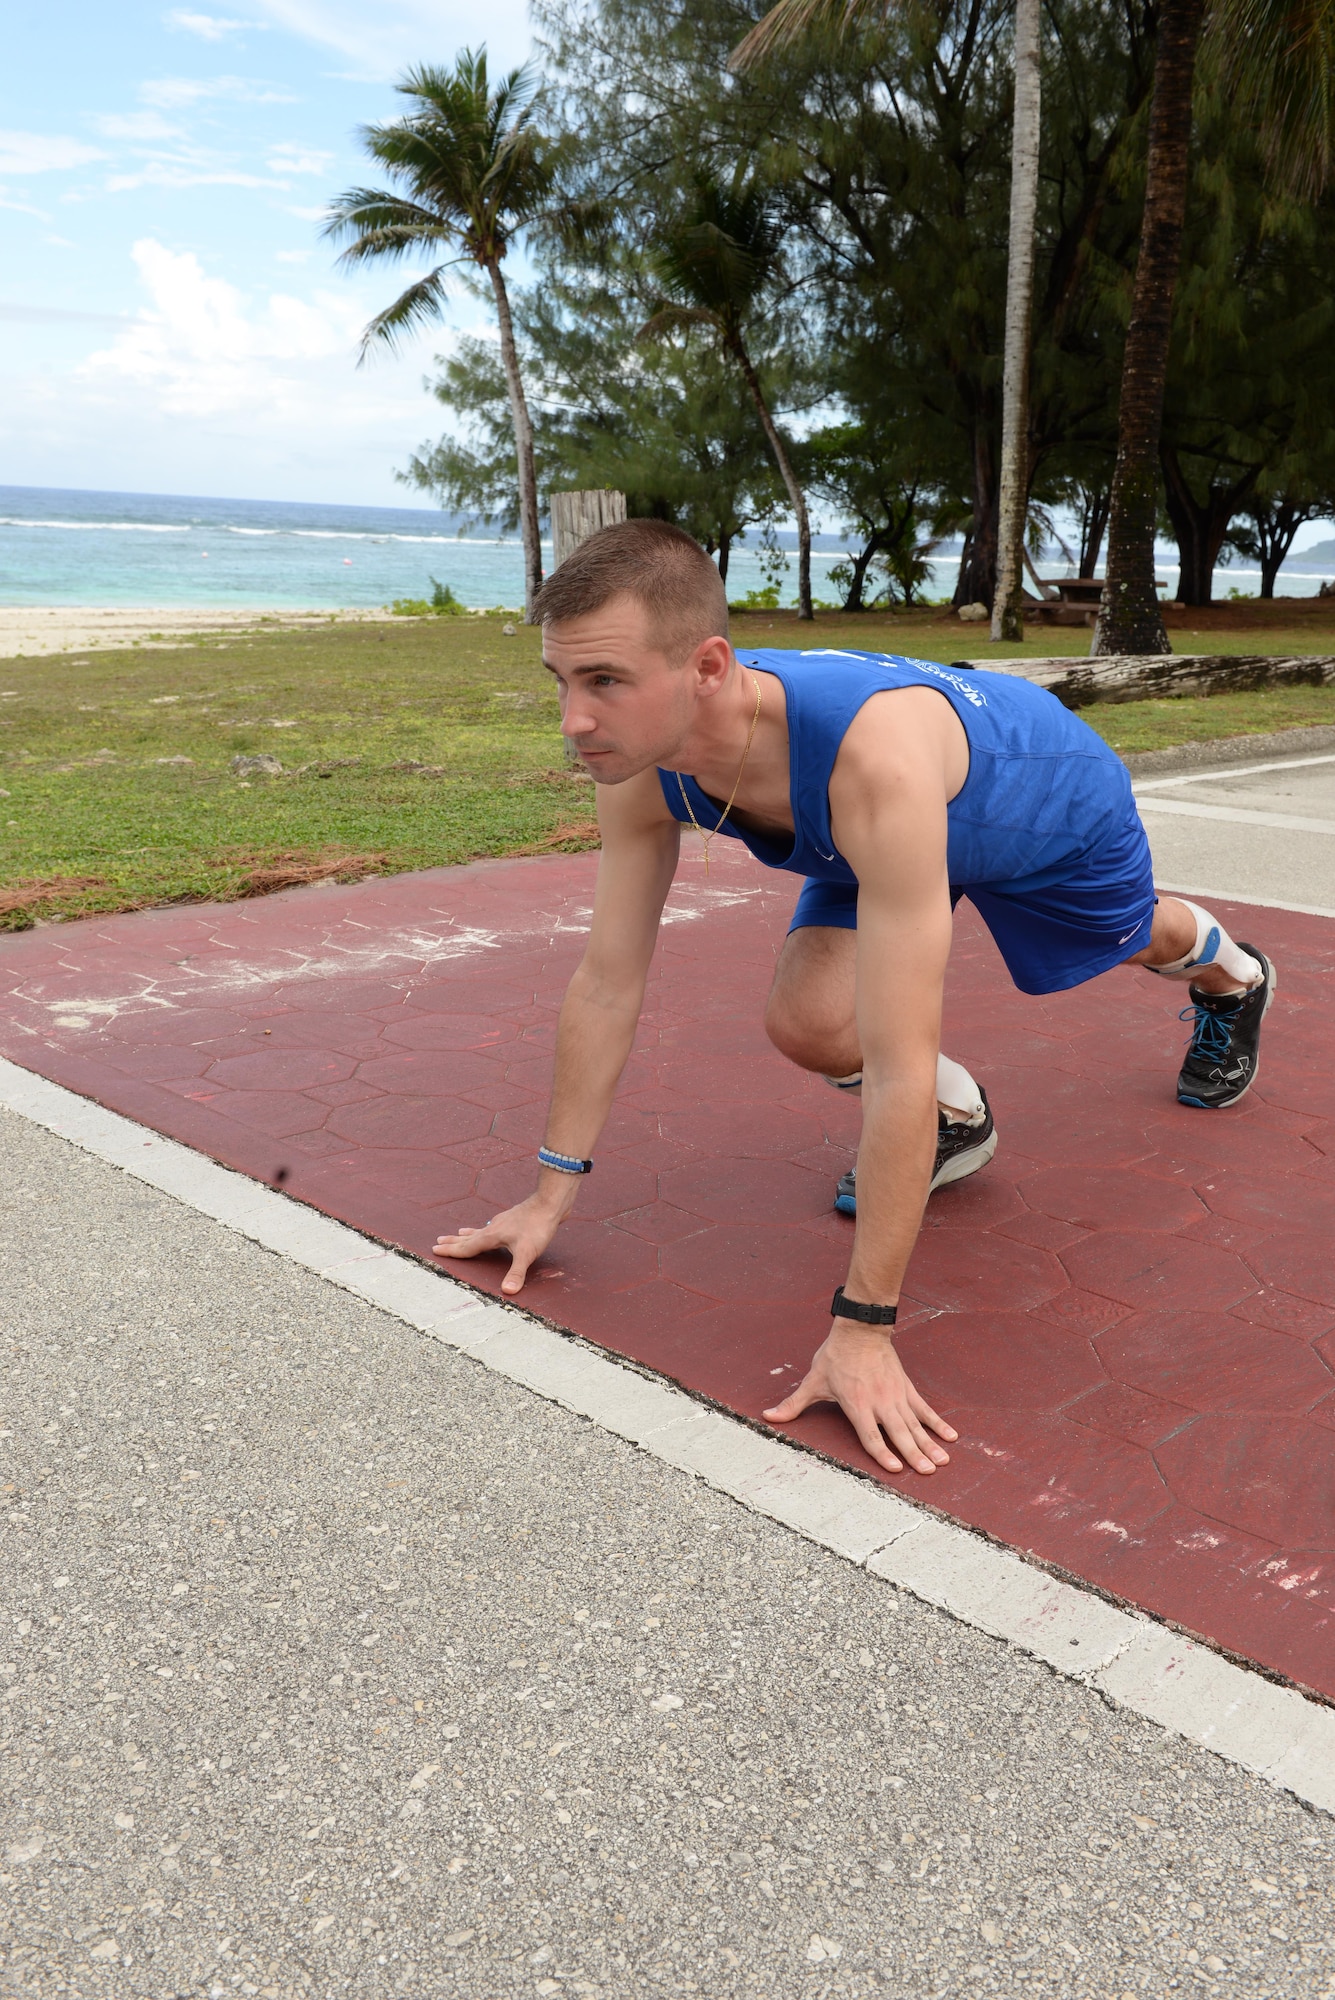 Second Lt. Ryan Novack, the 36th Munitions Squadron flight leader, prepares to run at Andersen Air Force Base, Guam, March 1, 2017. Novack was a victim of a serious spinal injury from riding dirt bikes, resulting in him being paralyzed below the knees. After attending months of physical therapy, he returned to work and is currently conditioning for the Defense Department Warrior Games this summer in Chicago. (U.S. Air Force photo by Senior Airman Cierra Presentado)